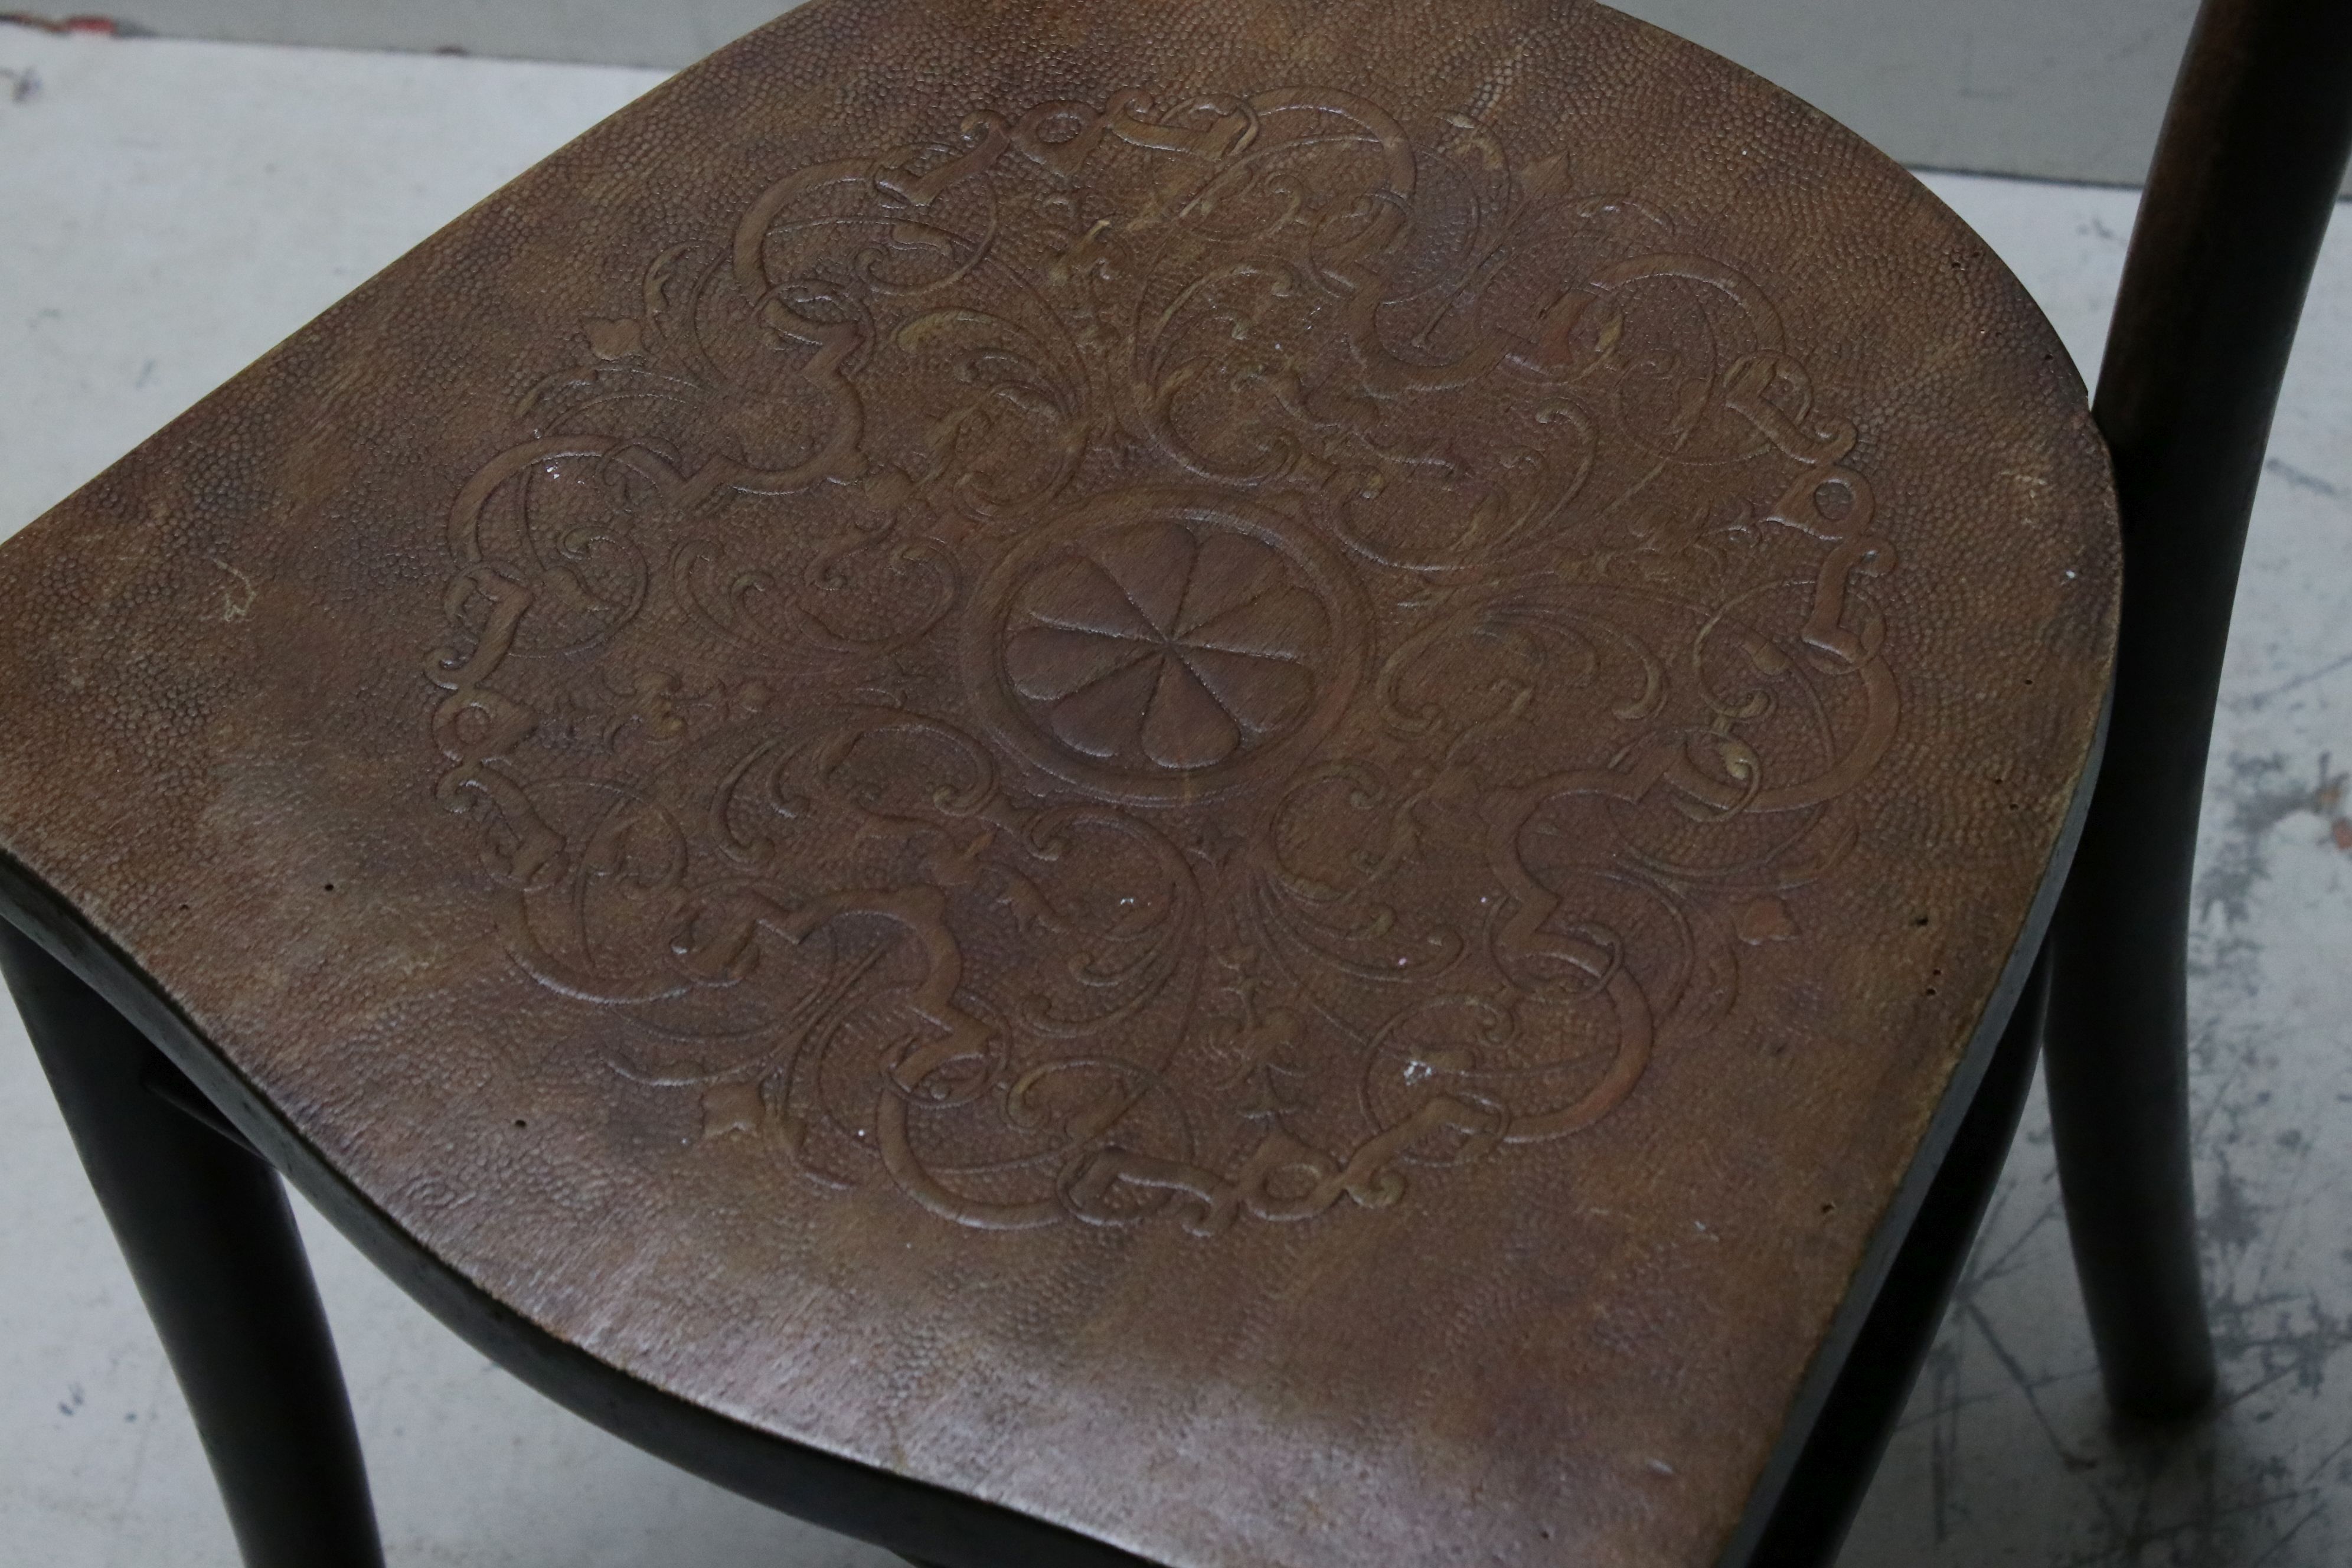 Pair of Mundus and Kohn Bentwood Cafe/Bistro Chairs with embossed seats, paper labels to bottom - Image 6 of 10